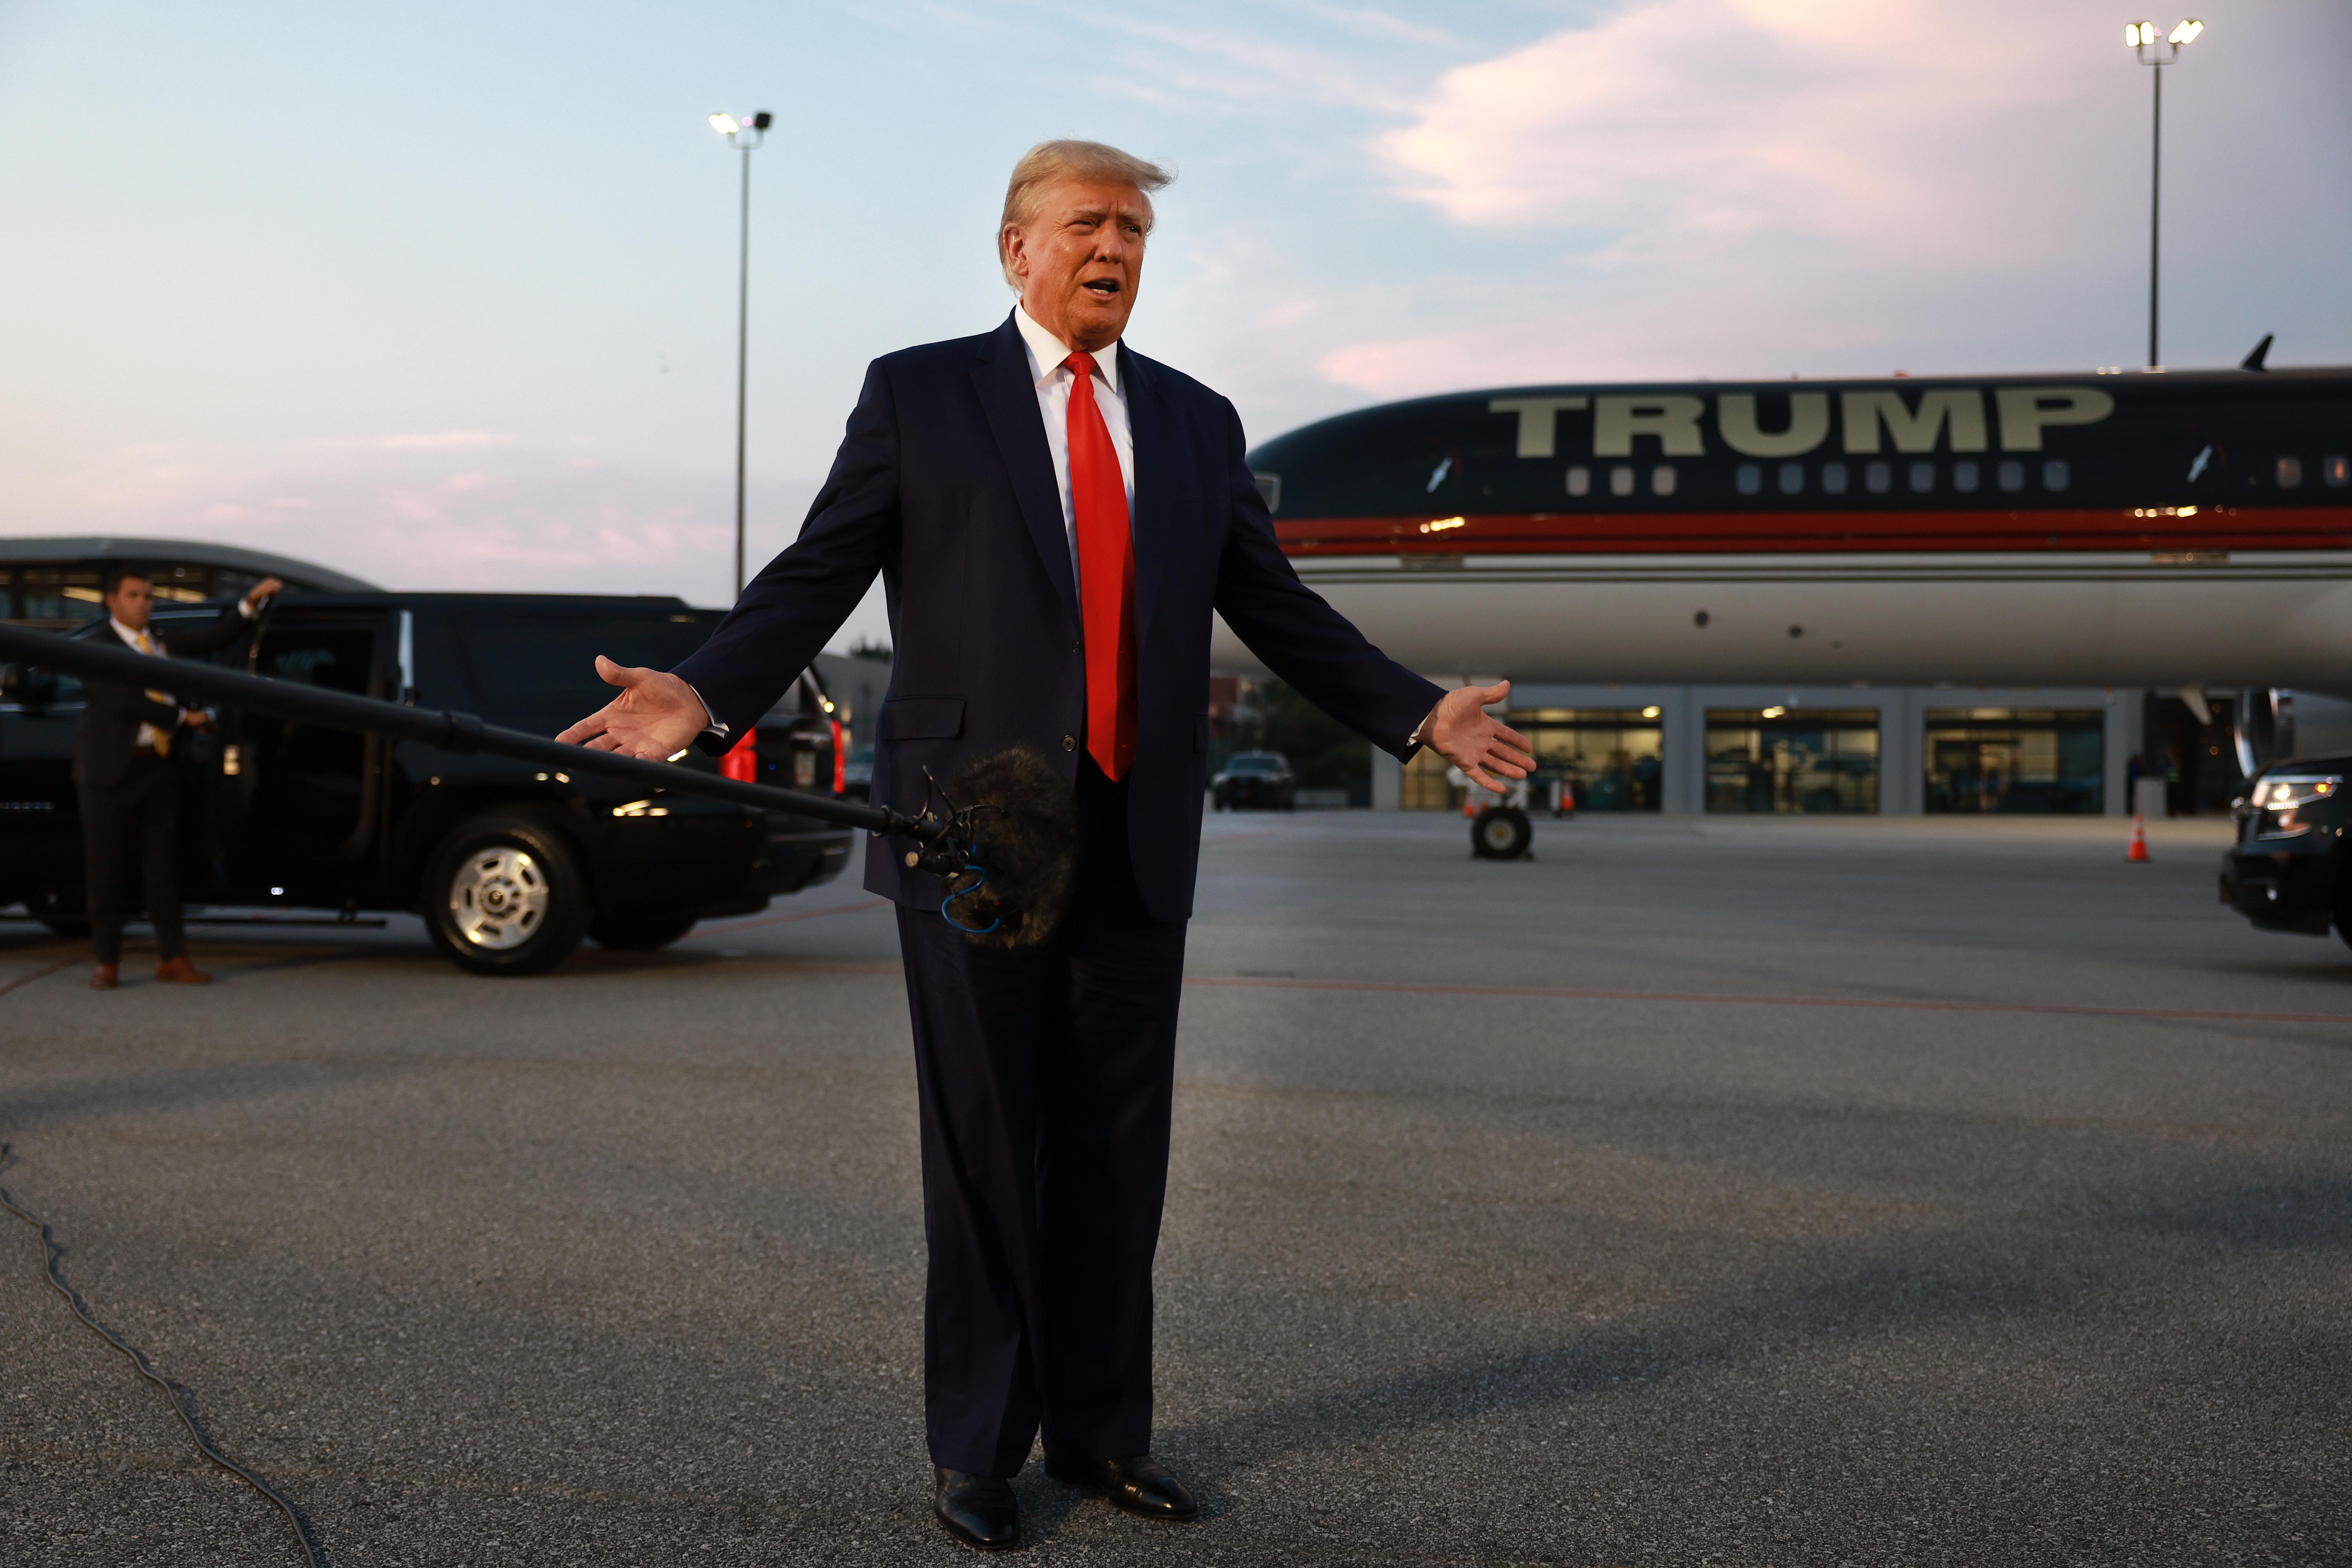 Trump standing in front of a Trump plane with his arms spread apart. 